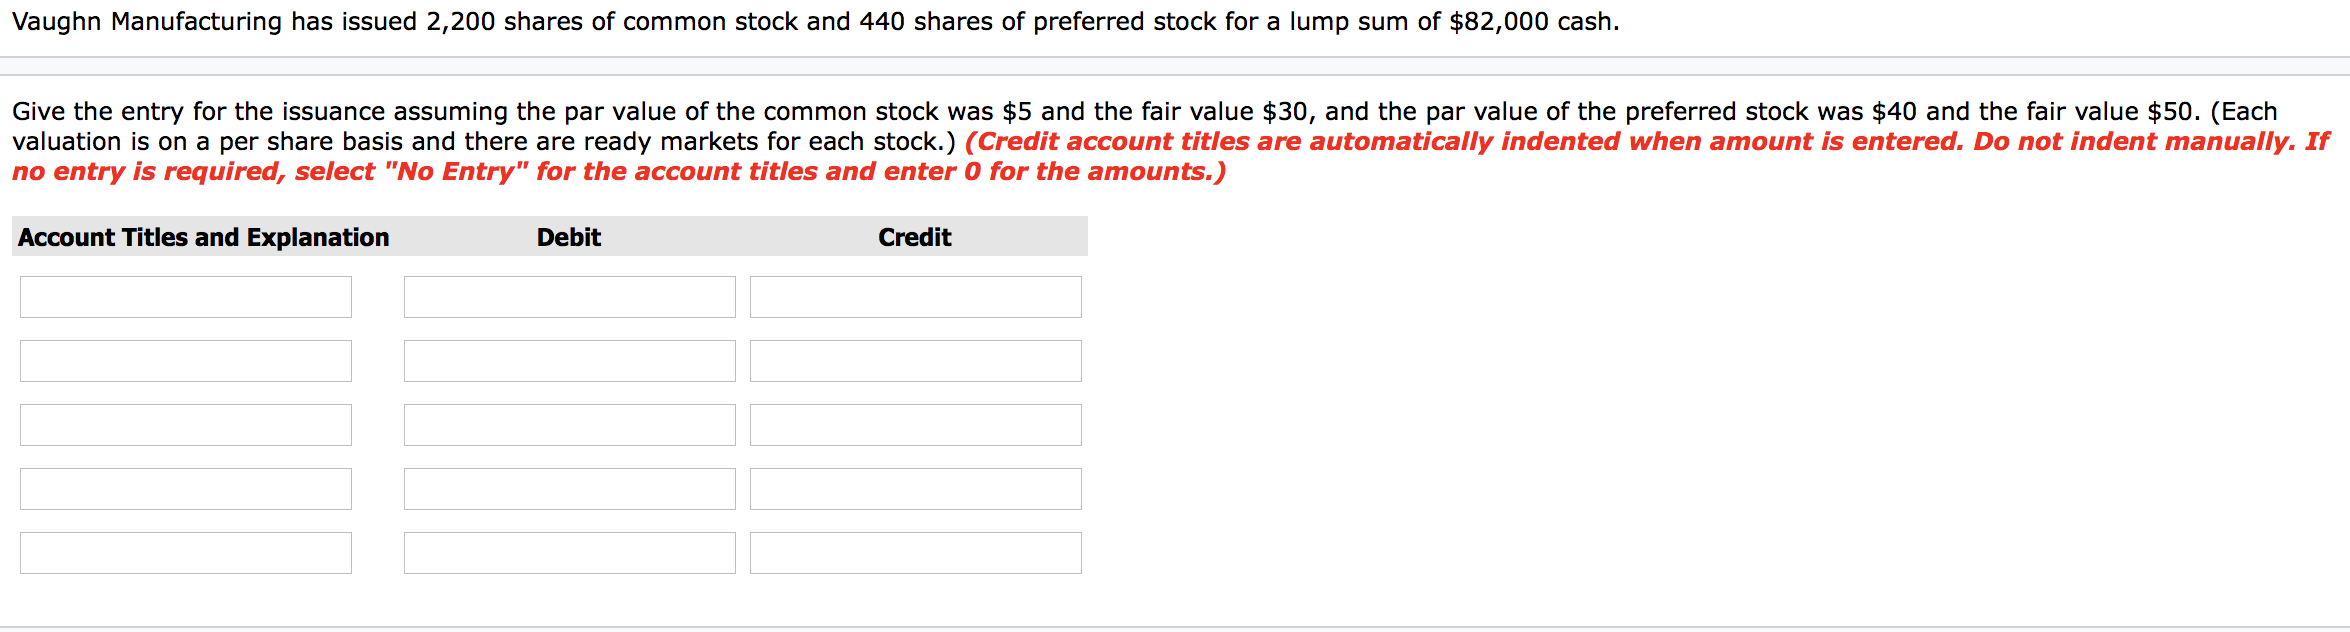 Vaughn Manufacturing has issued 2,200 shares of common stock and 440 shares of preferred stock for a lump sum